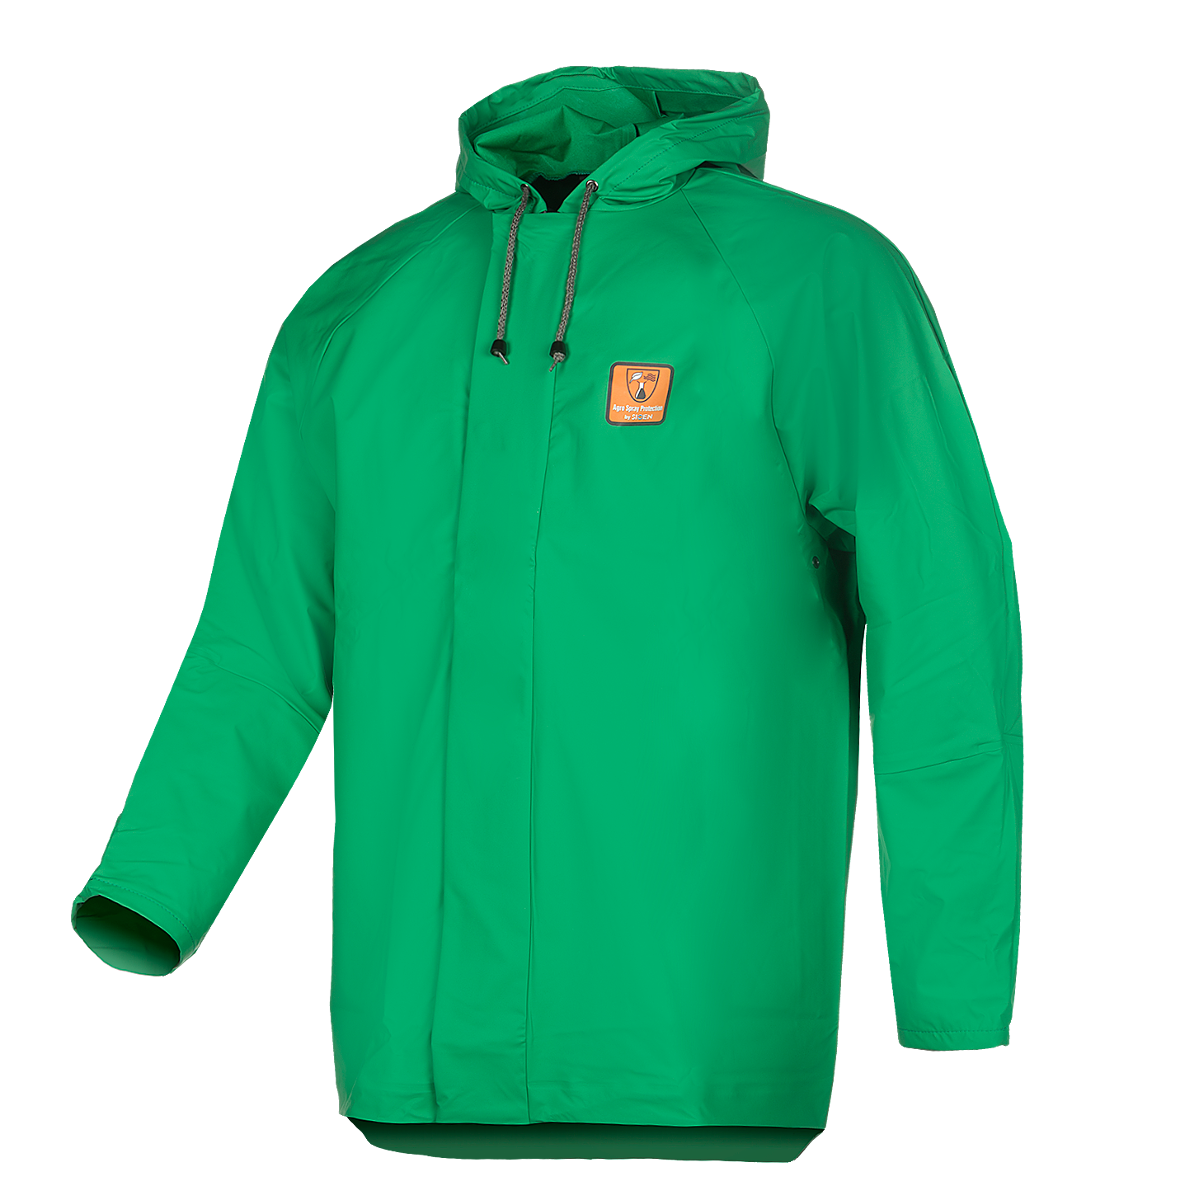 Waterproof Clothing - O'Connor's Hardware and Farm Supplies